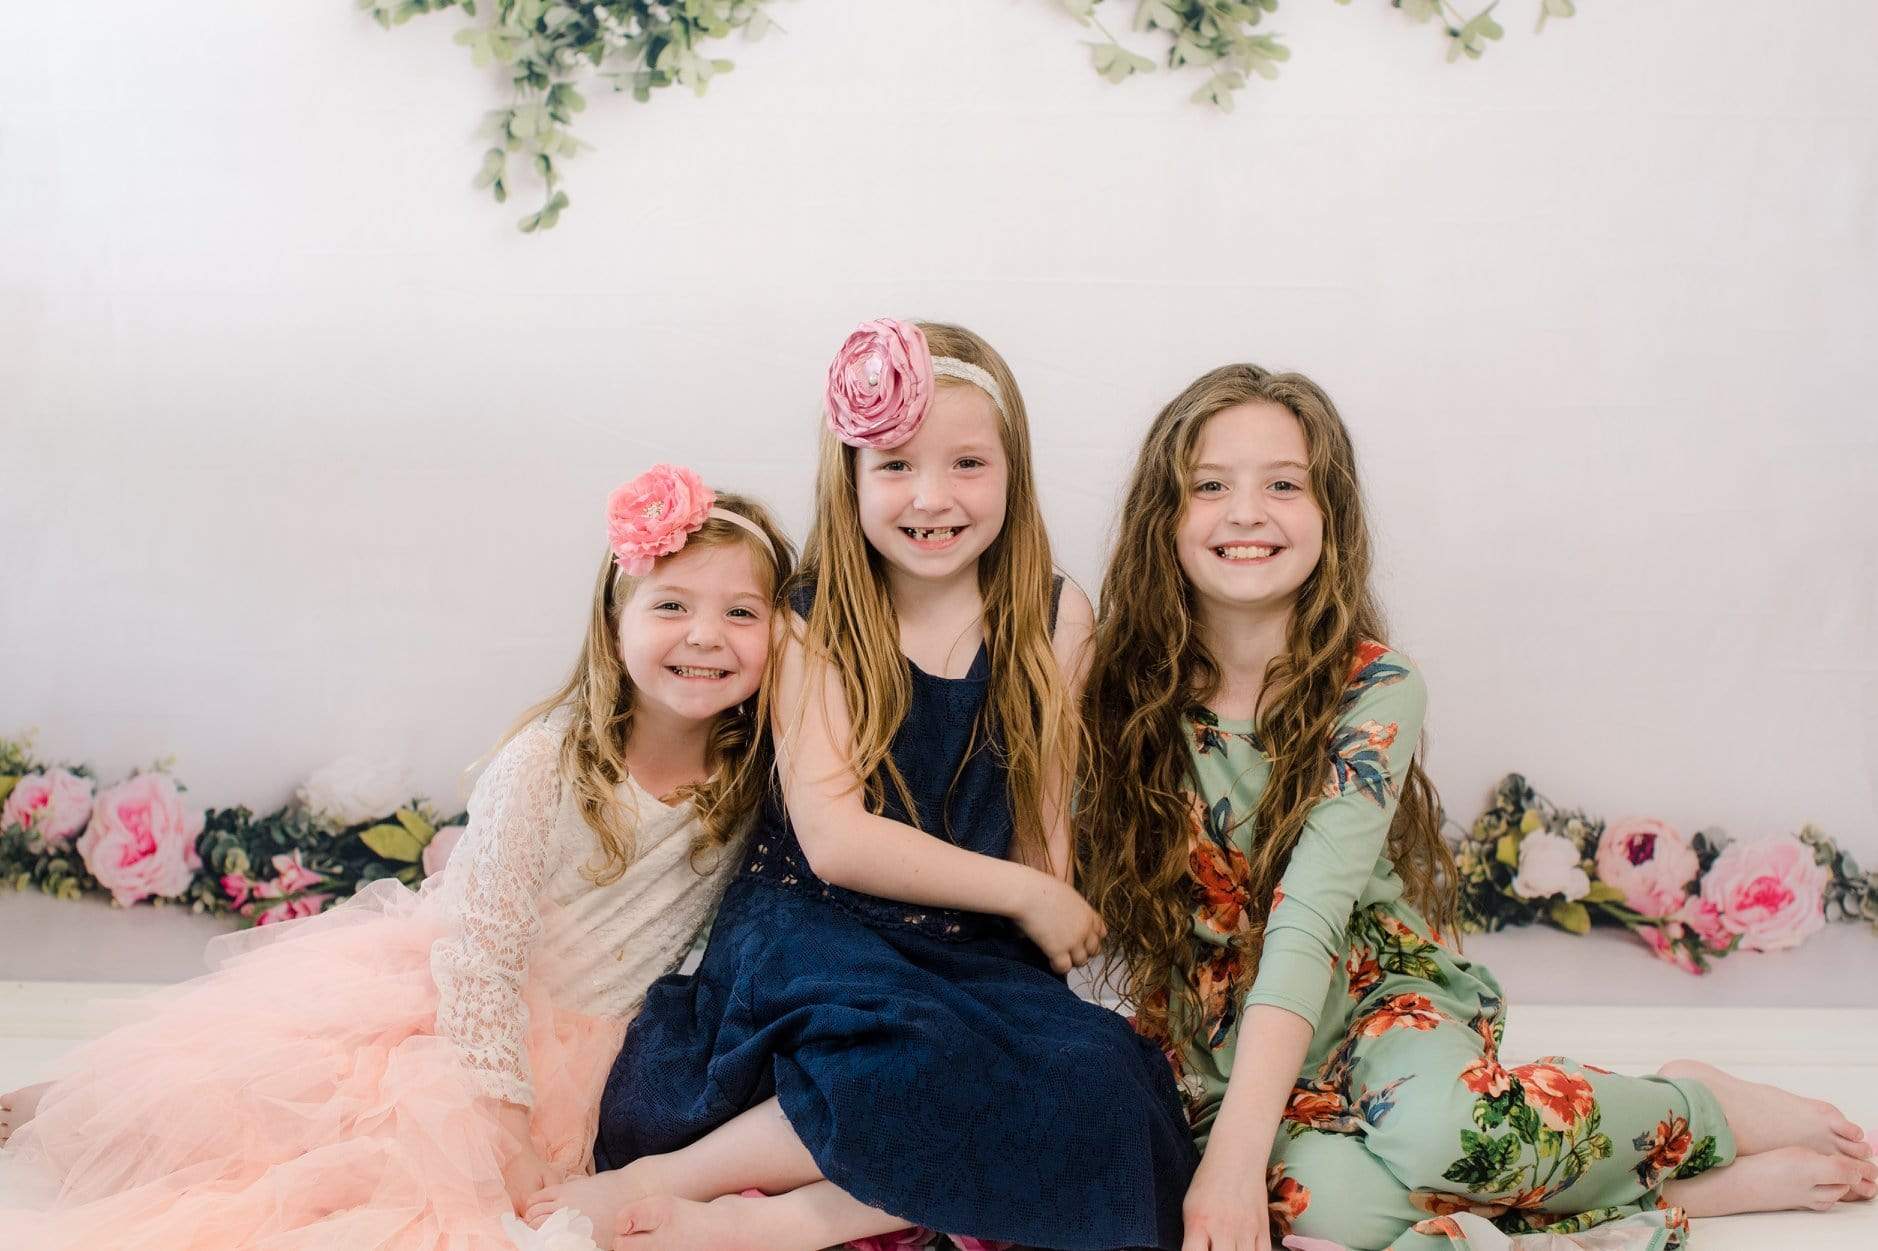 Katebackdrop：Kate Spring Flowers Backdrop for Photography Designed by Megan Leigh Photography